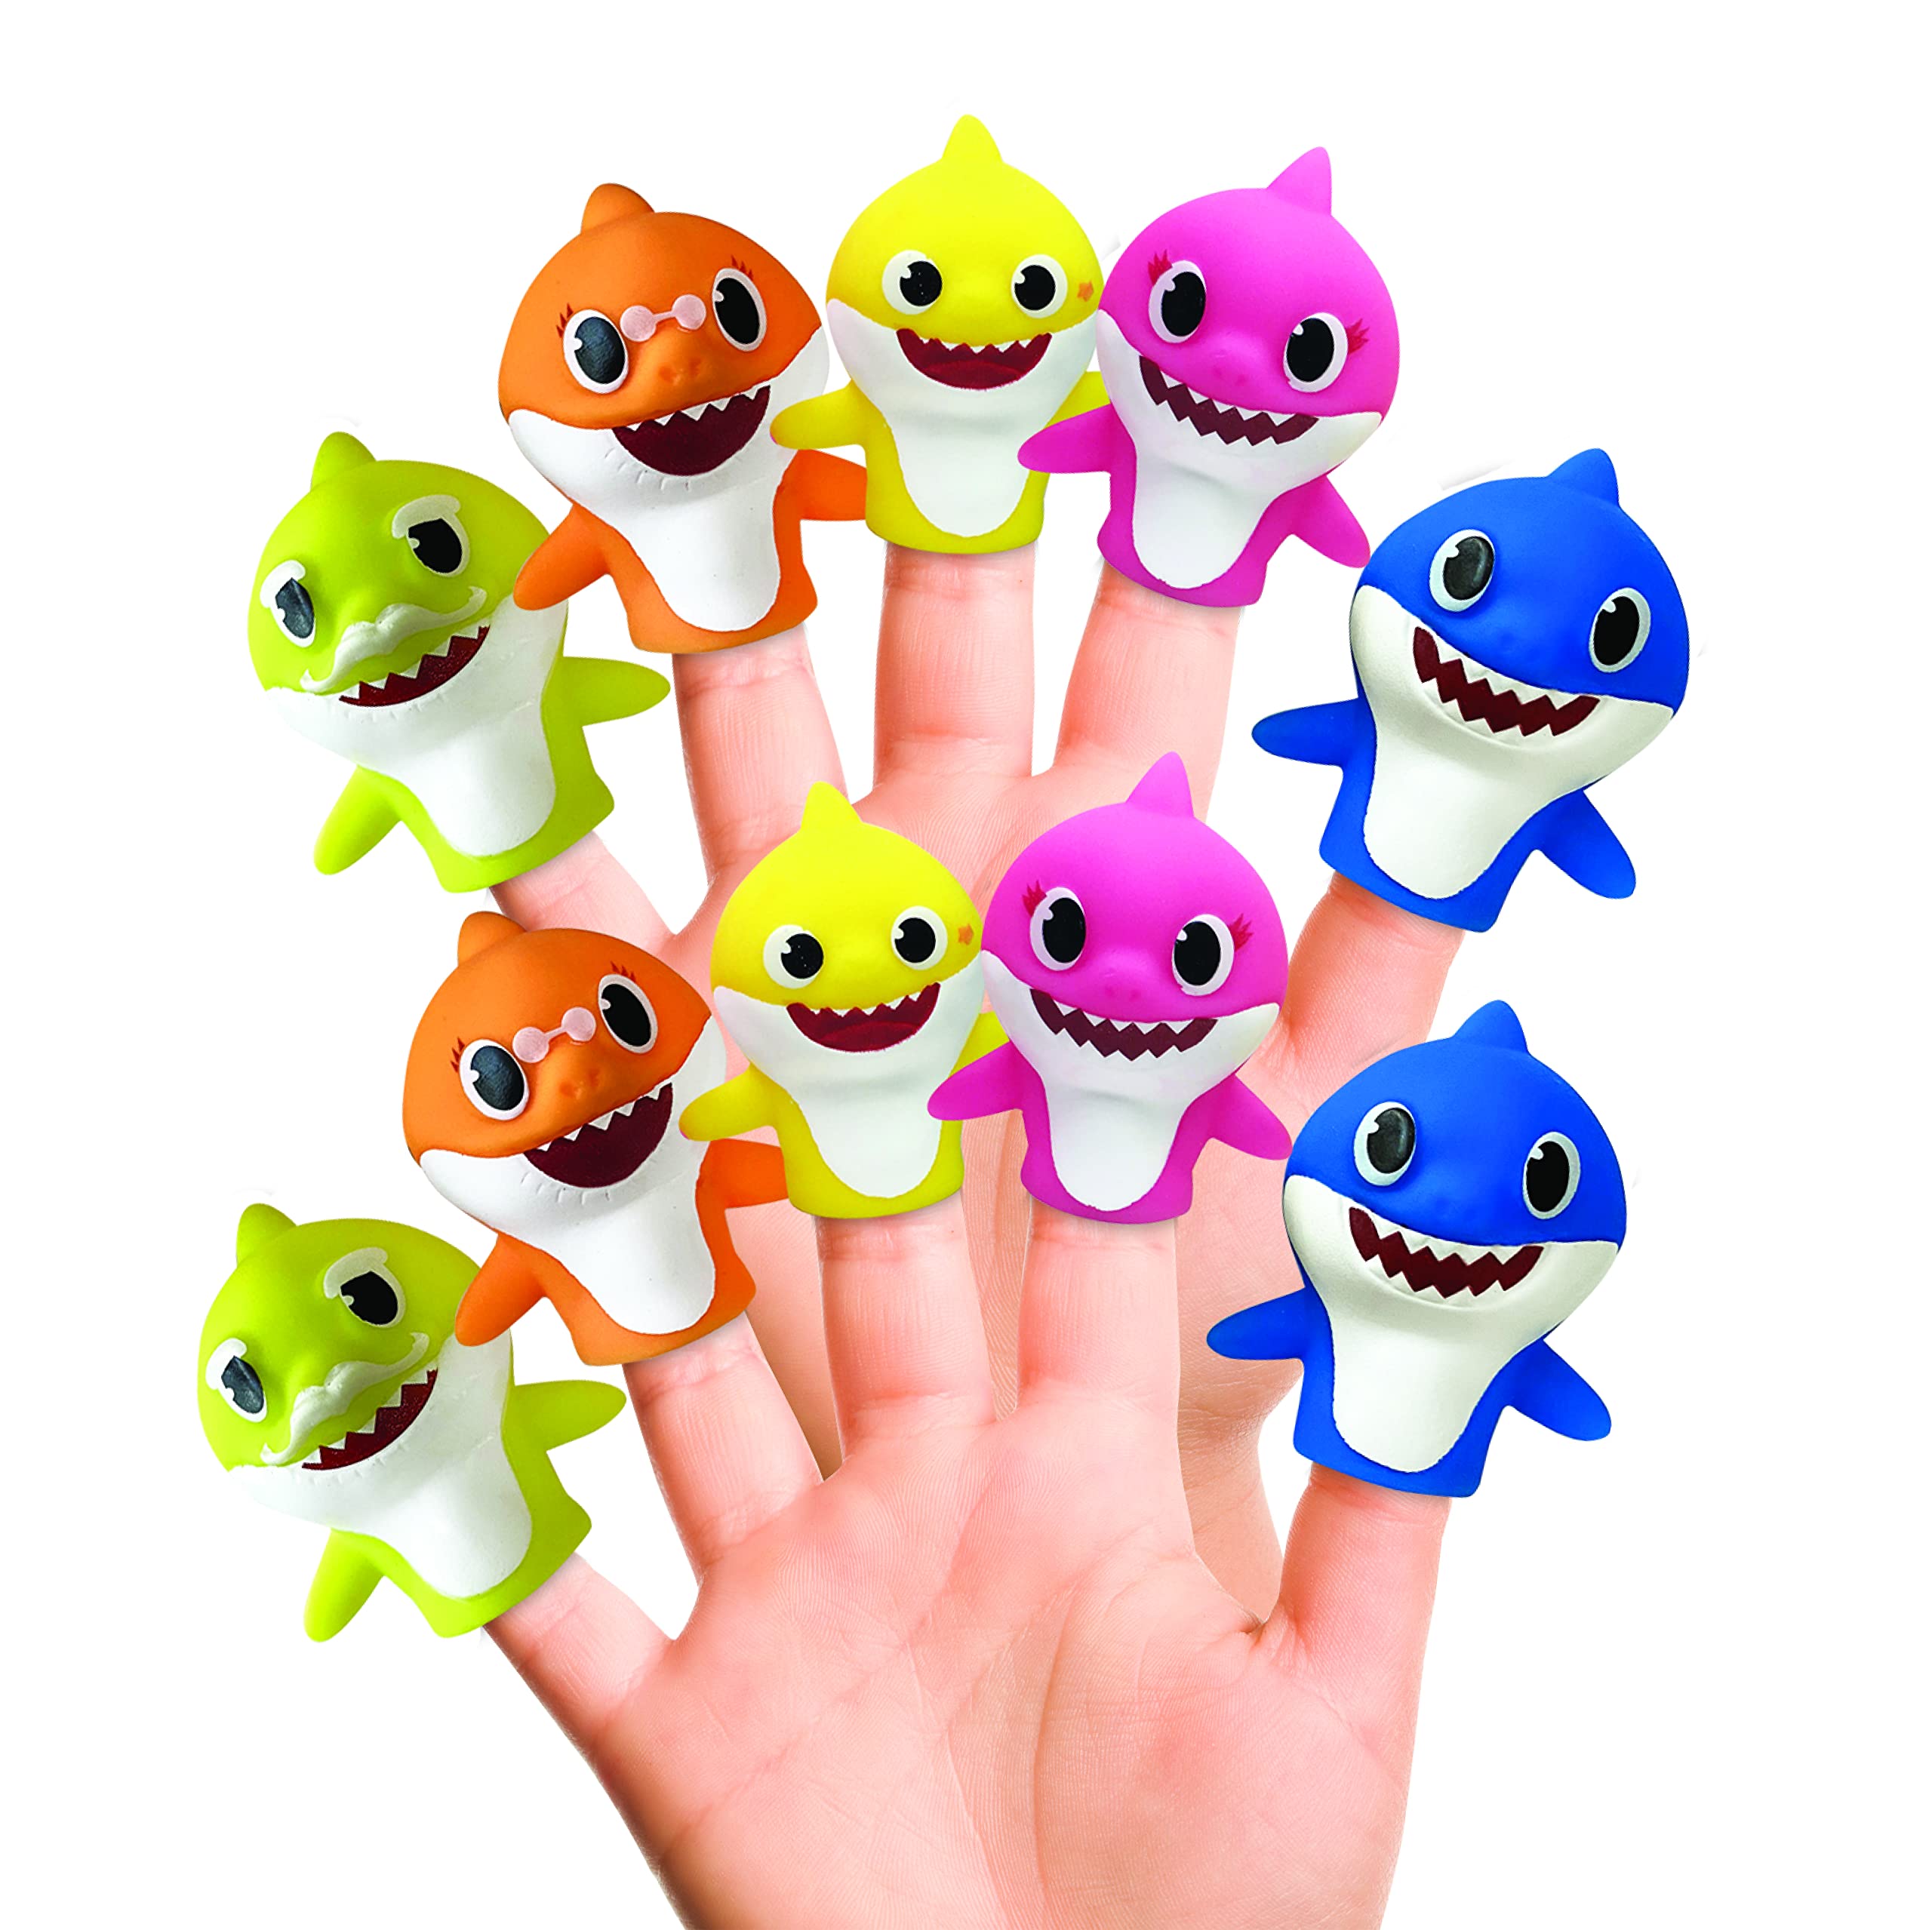 Ginsey Nickelodeon Baby Shark 10 Pc Finger Puppet Set - Party Favors, Educational, Bath Toys, Story Time, Beach Toys, Playtime